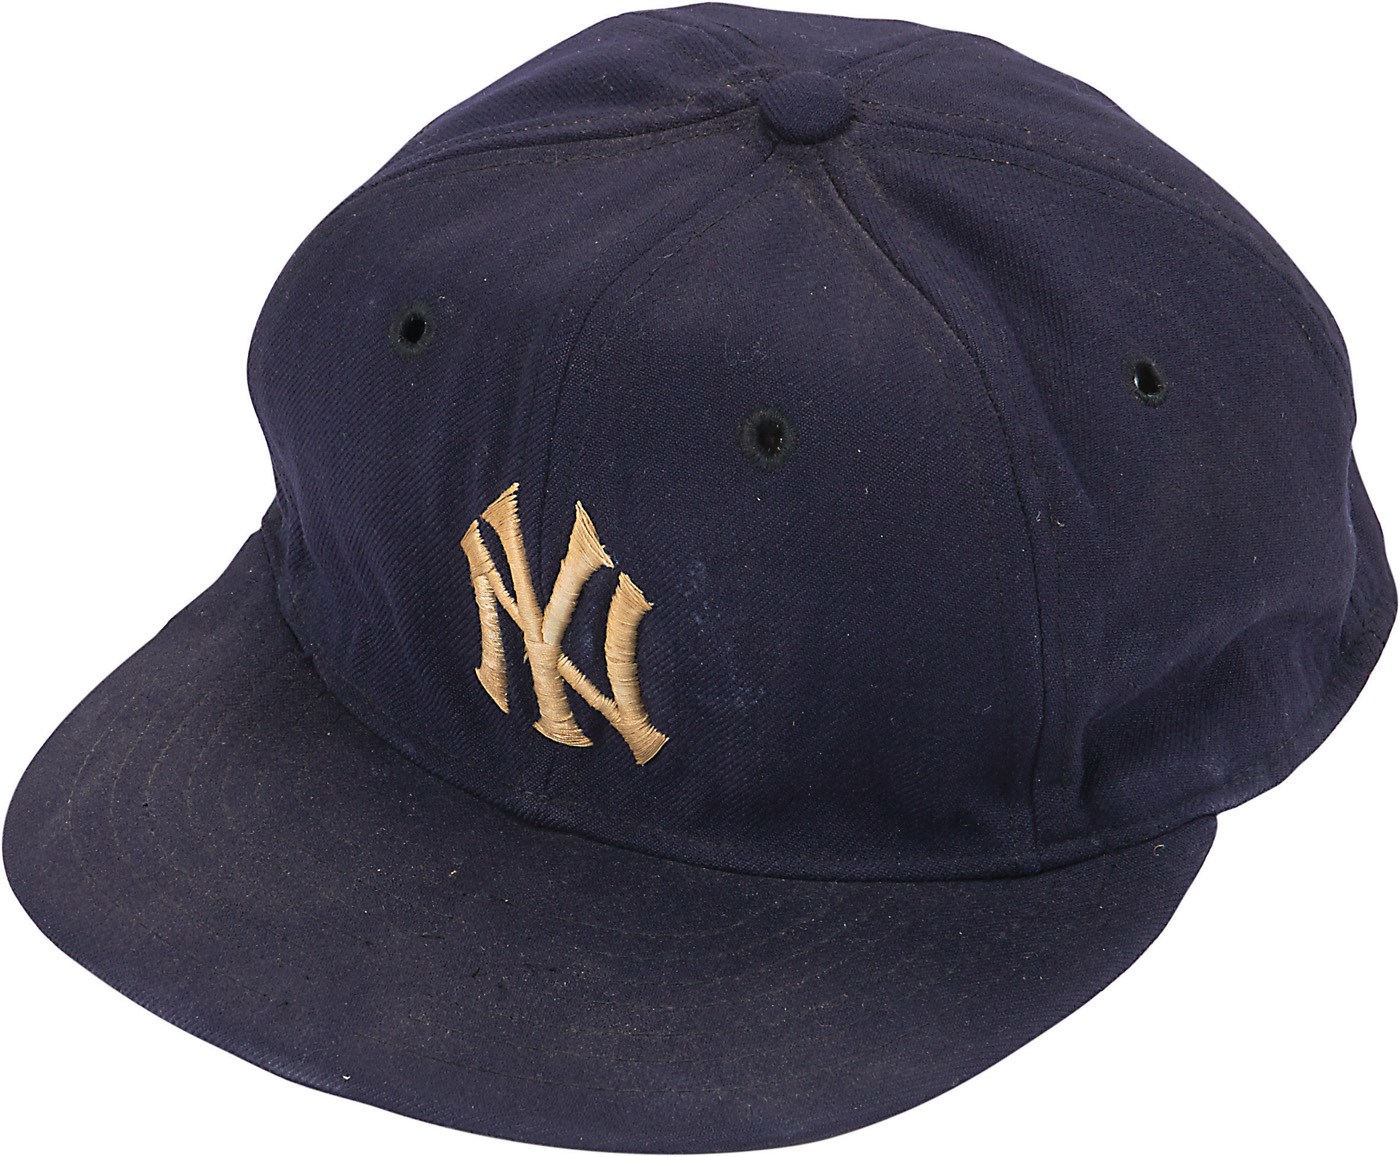 - Late 1950s/Early 1960s Mickey Mantle Game Used Cap from Pete Sheehy (MEARS)